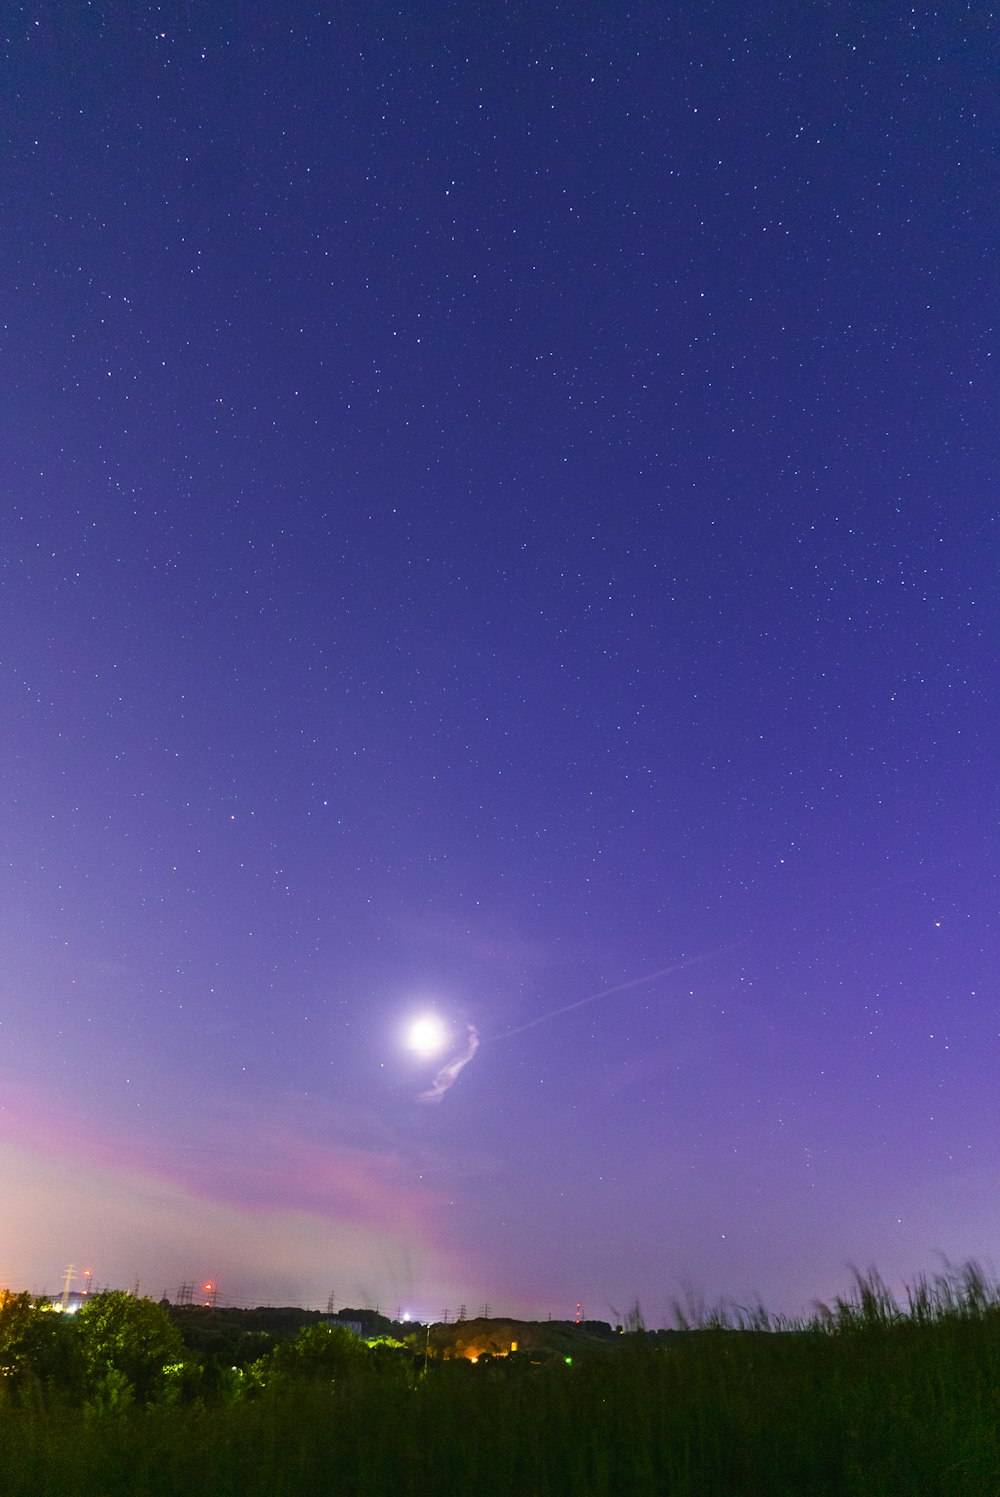 a view of the night sky with the moon in the distance